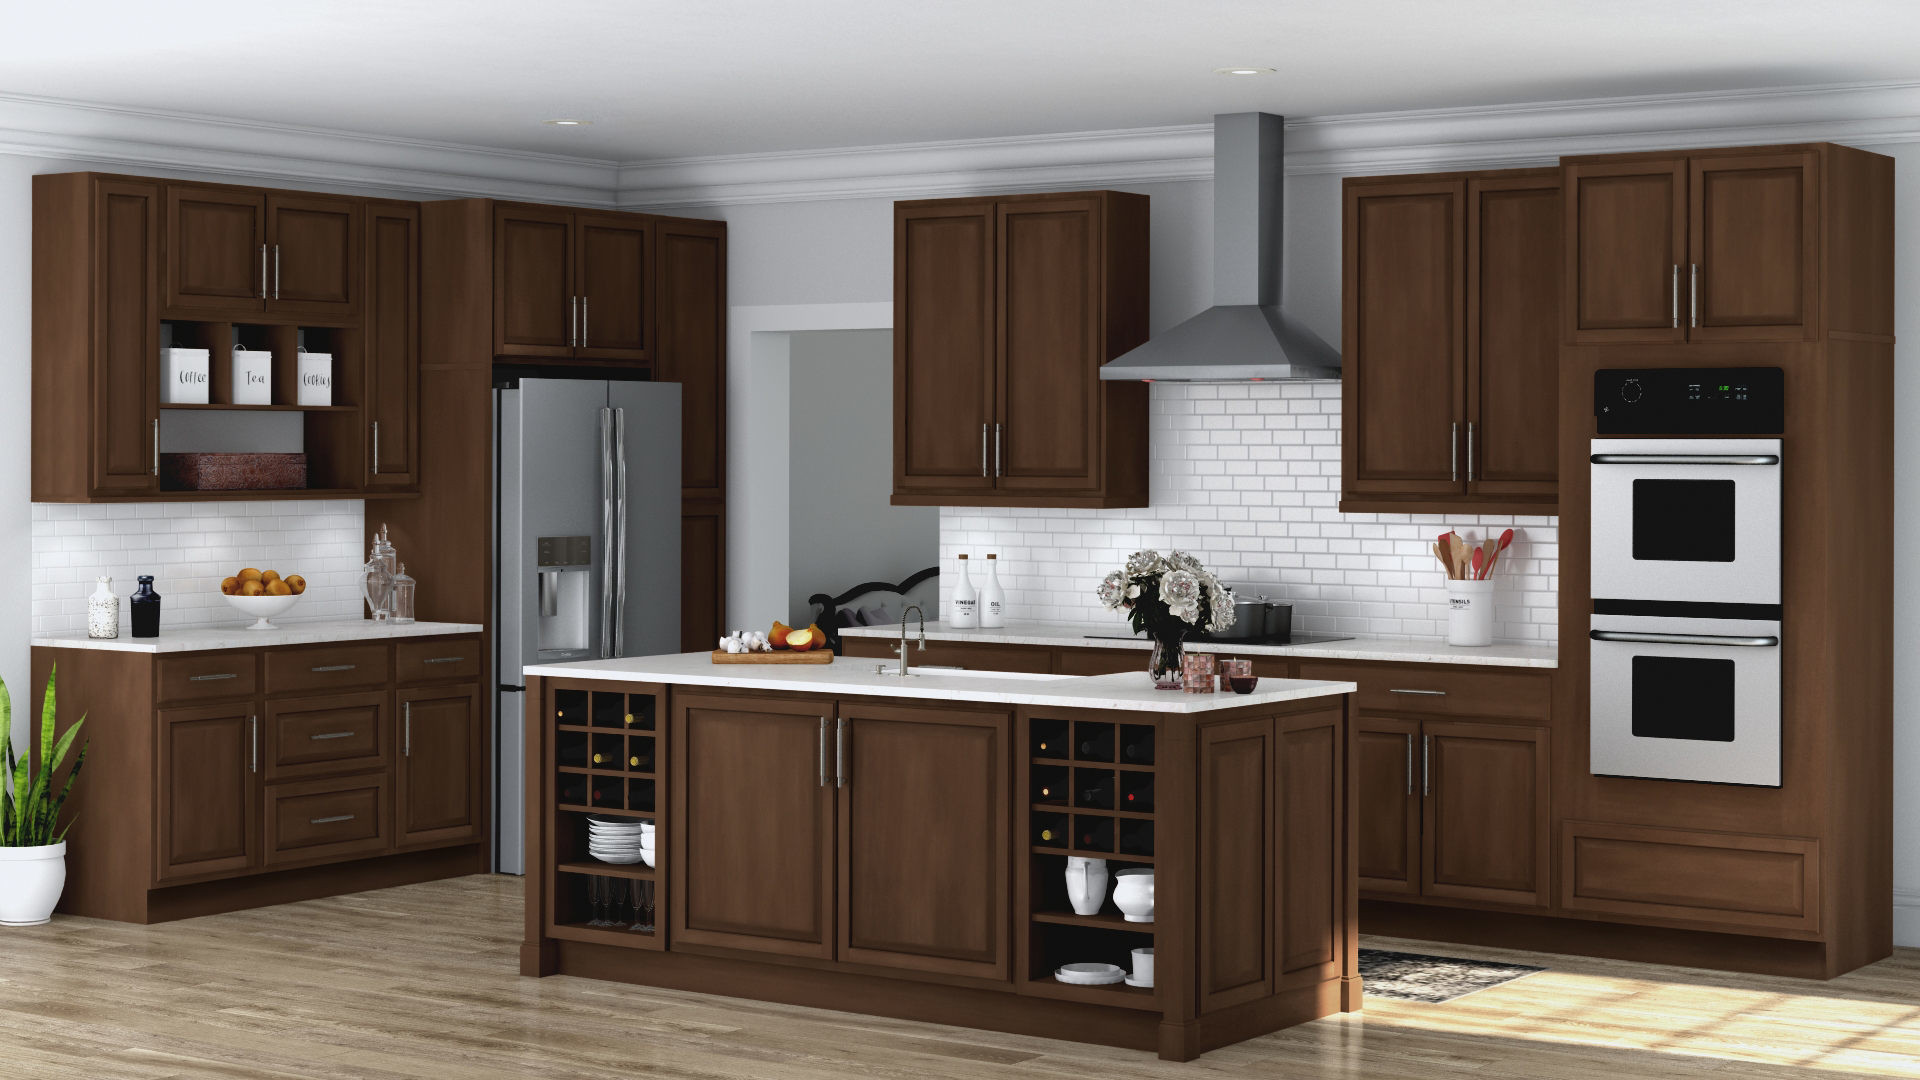 Homedepot Kitchen Cabinets
 Hampton Wall Kitchen Cabinets in Cognac – Kitchen – The